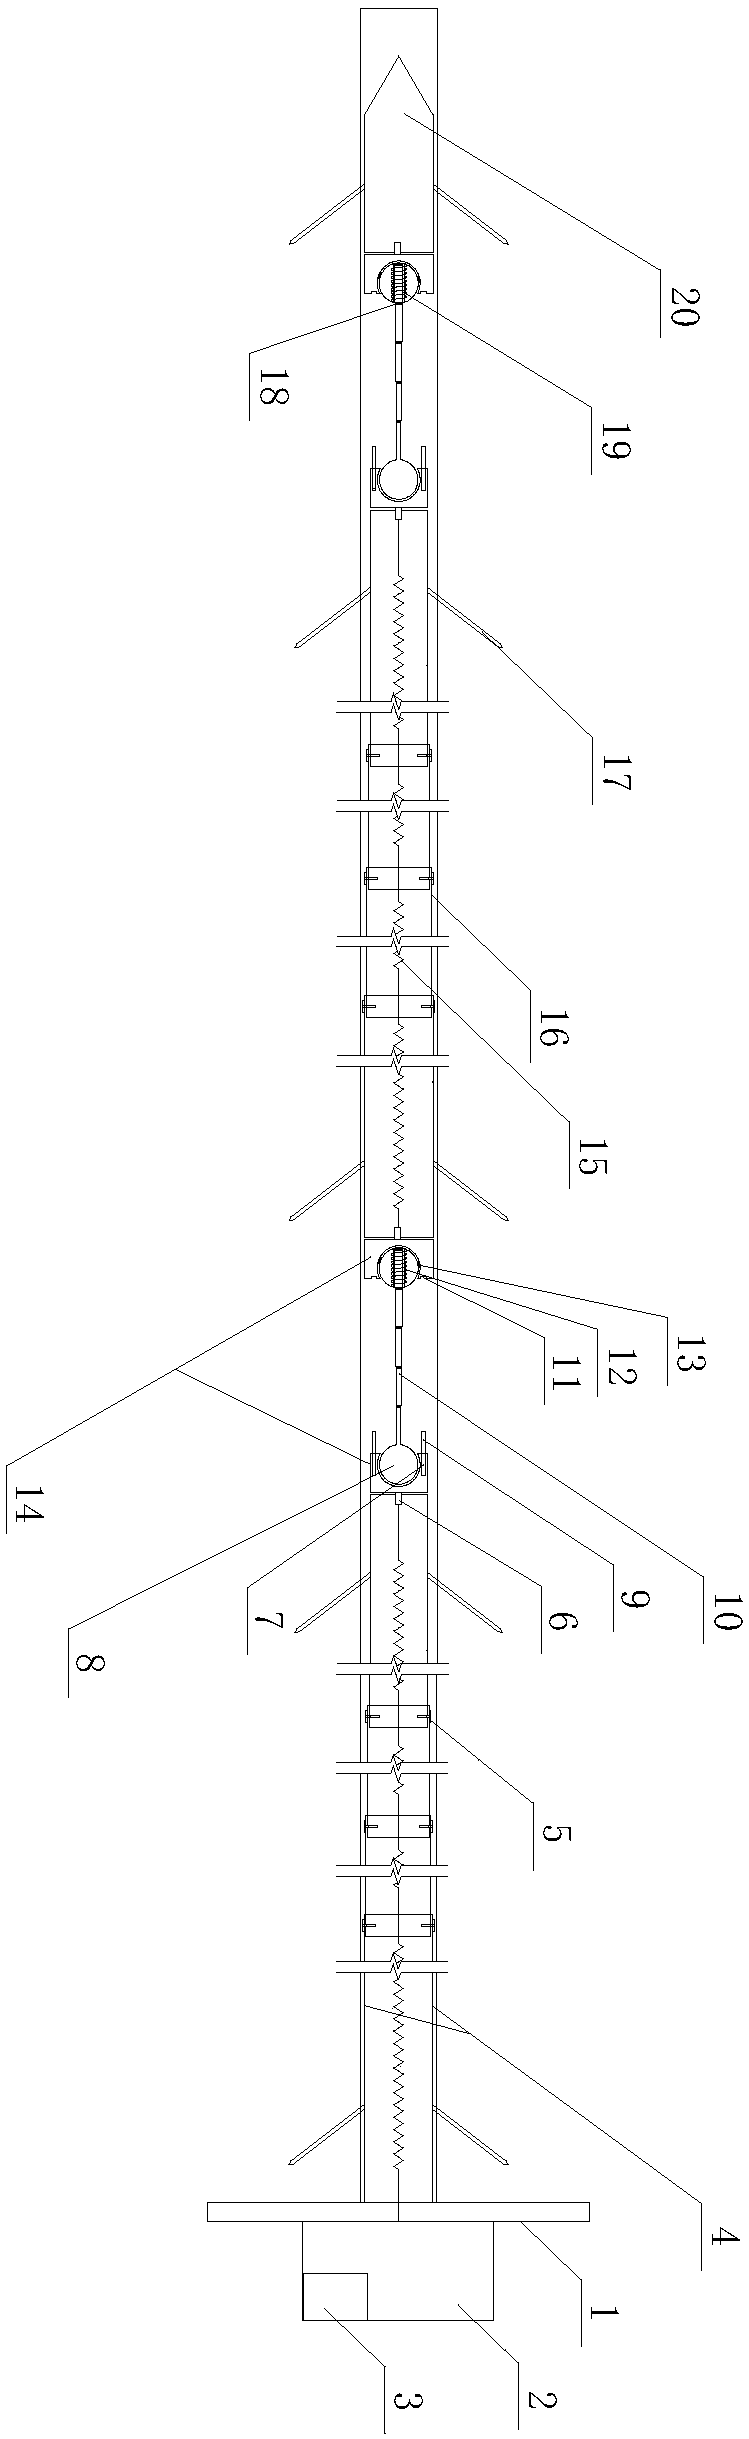 A Multipoint Displacement Meter for Automatically Measuring Spatial Displacement